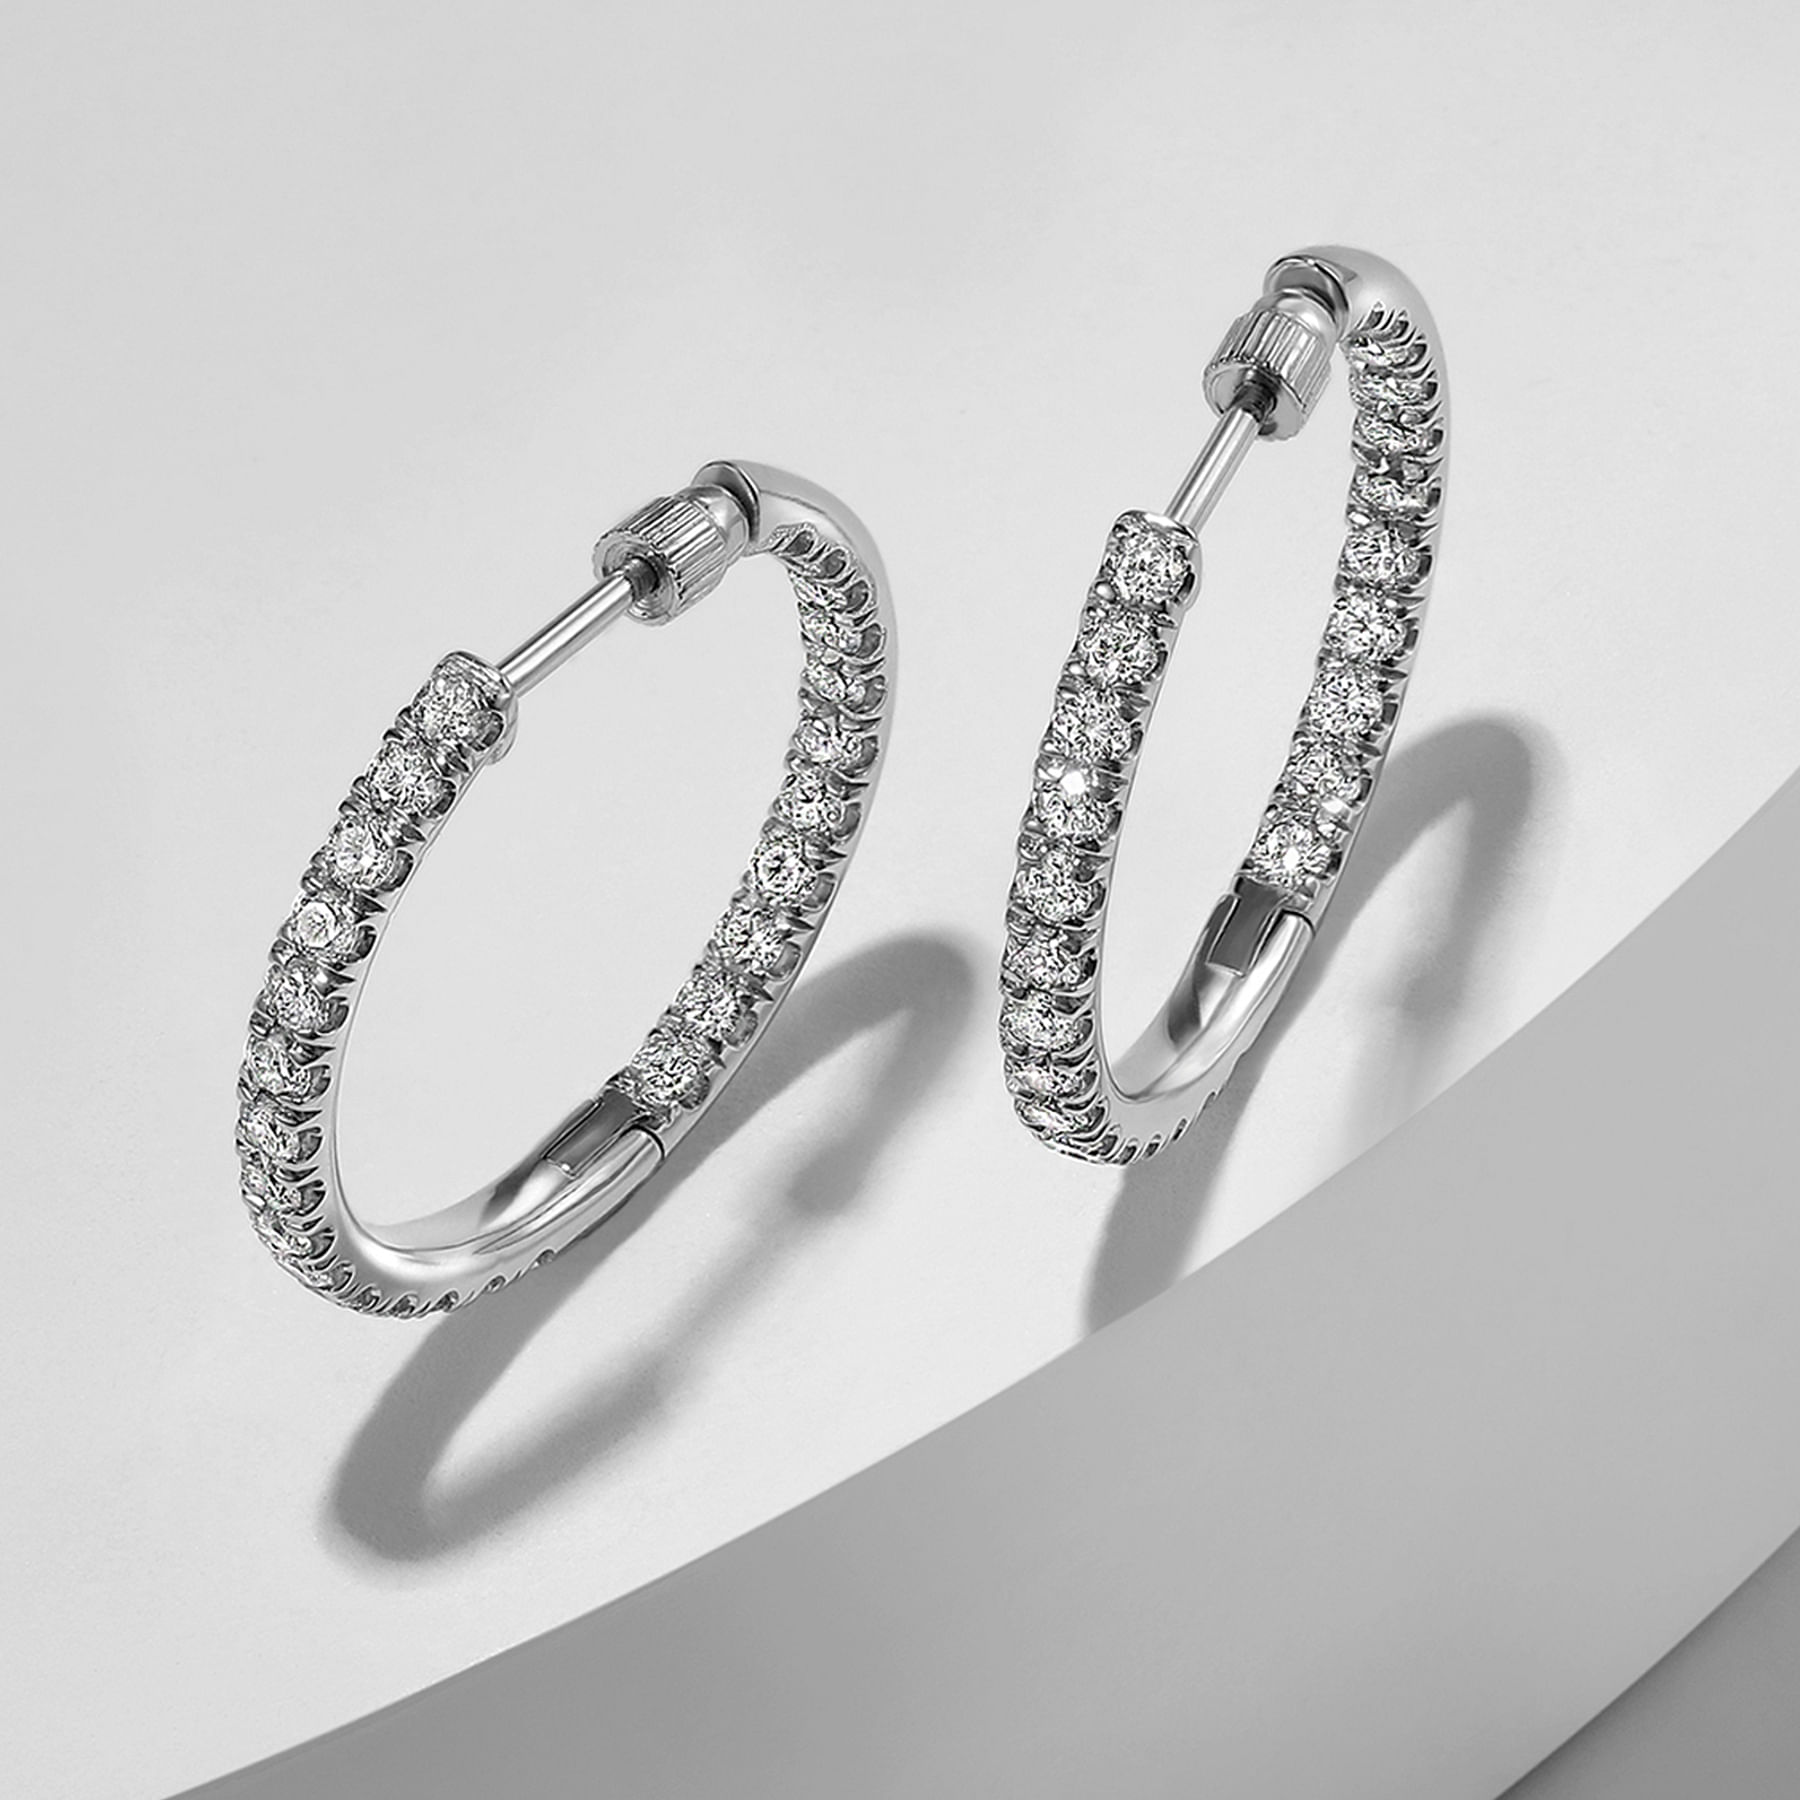 14K White Gold French Pavé 20mm Round Inside Out Diamond Hoop Earrings